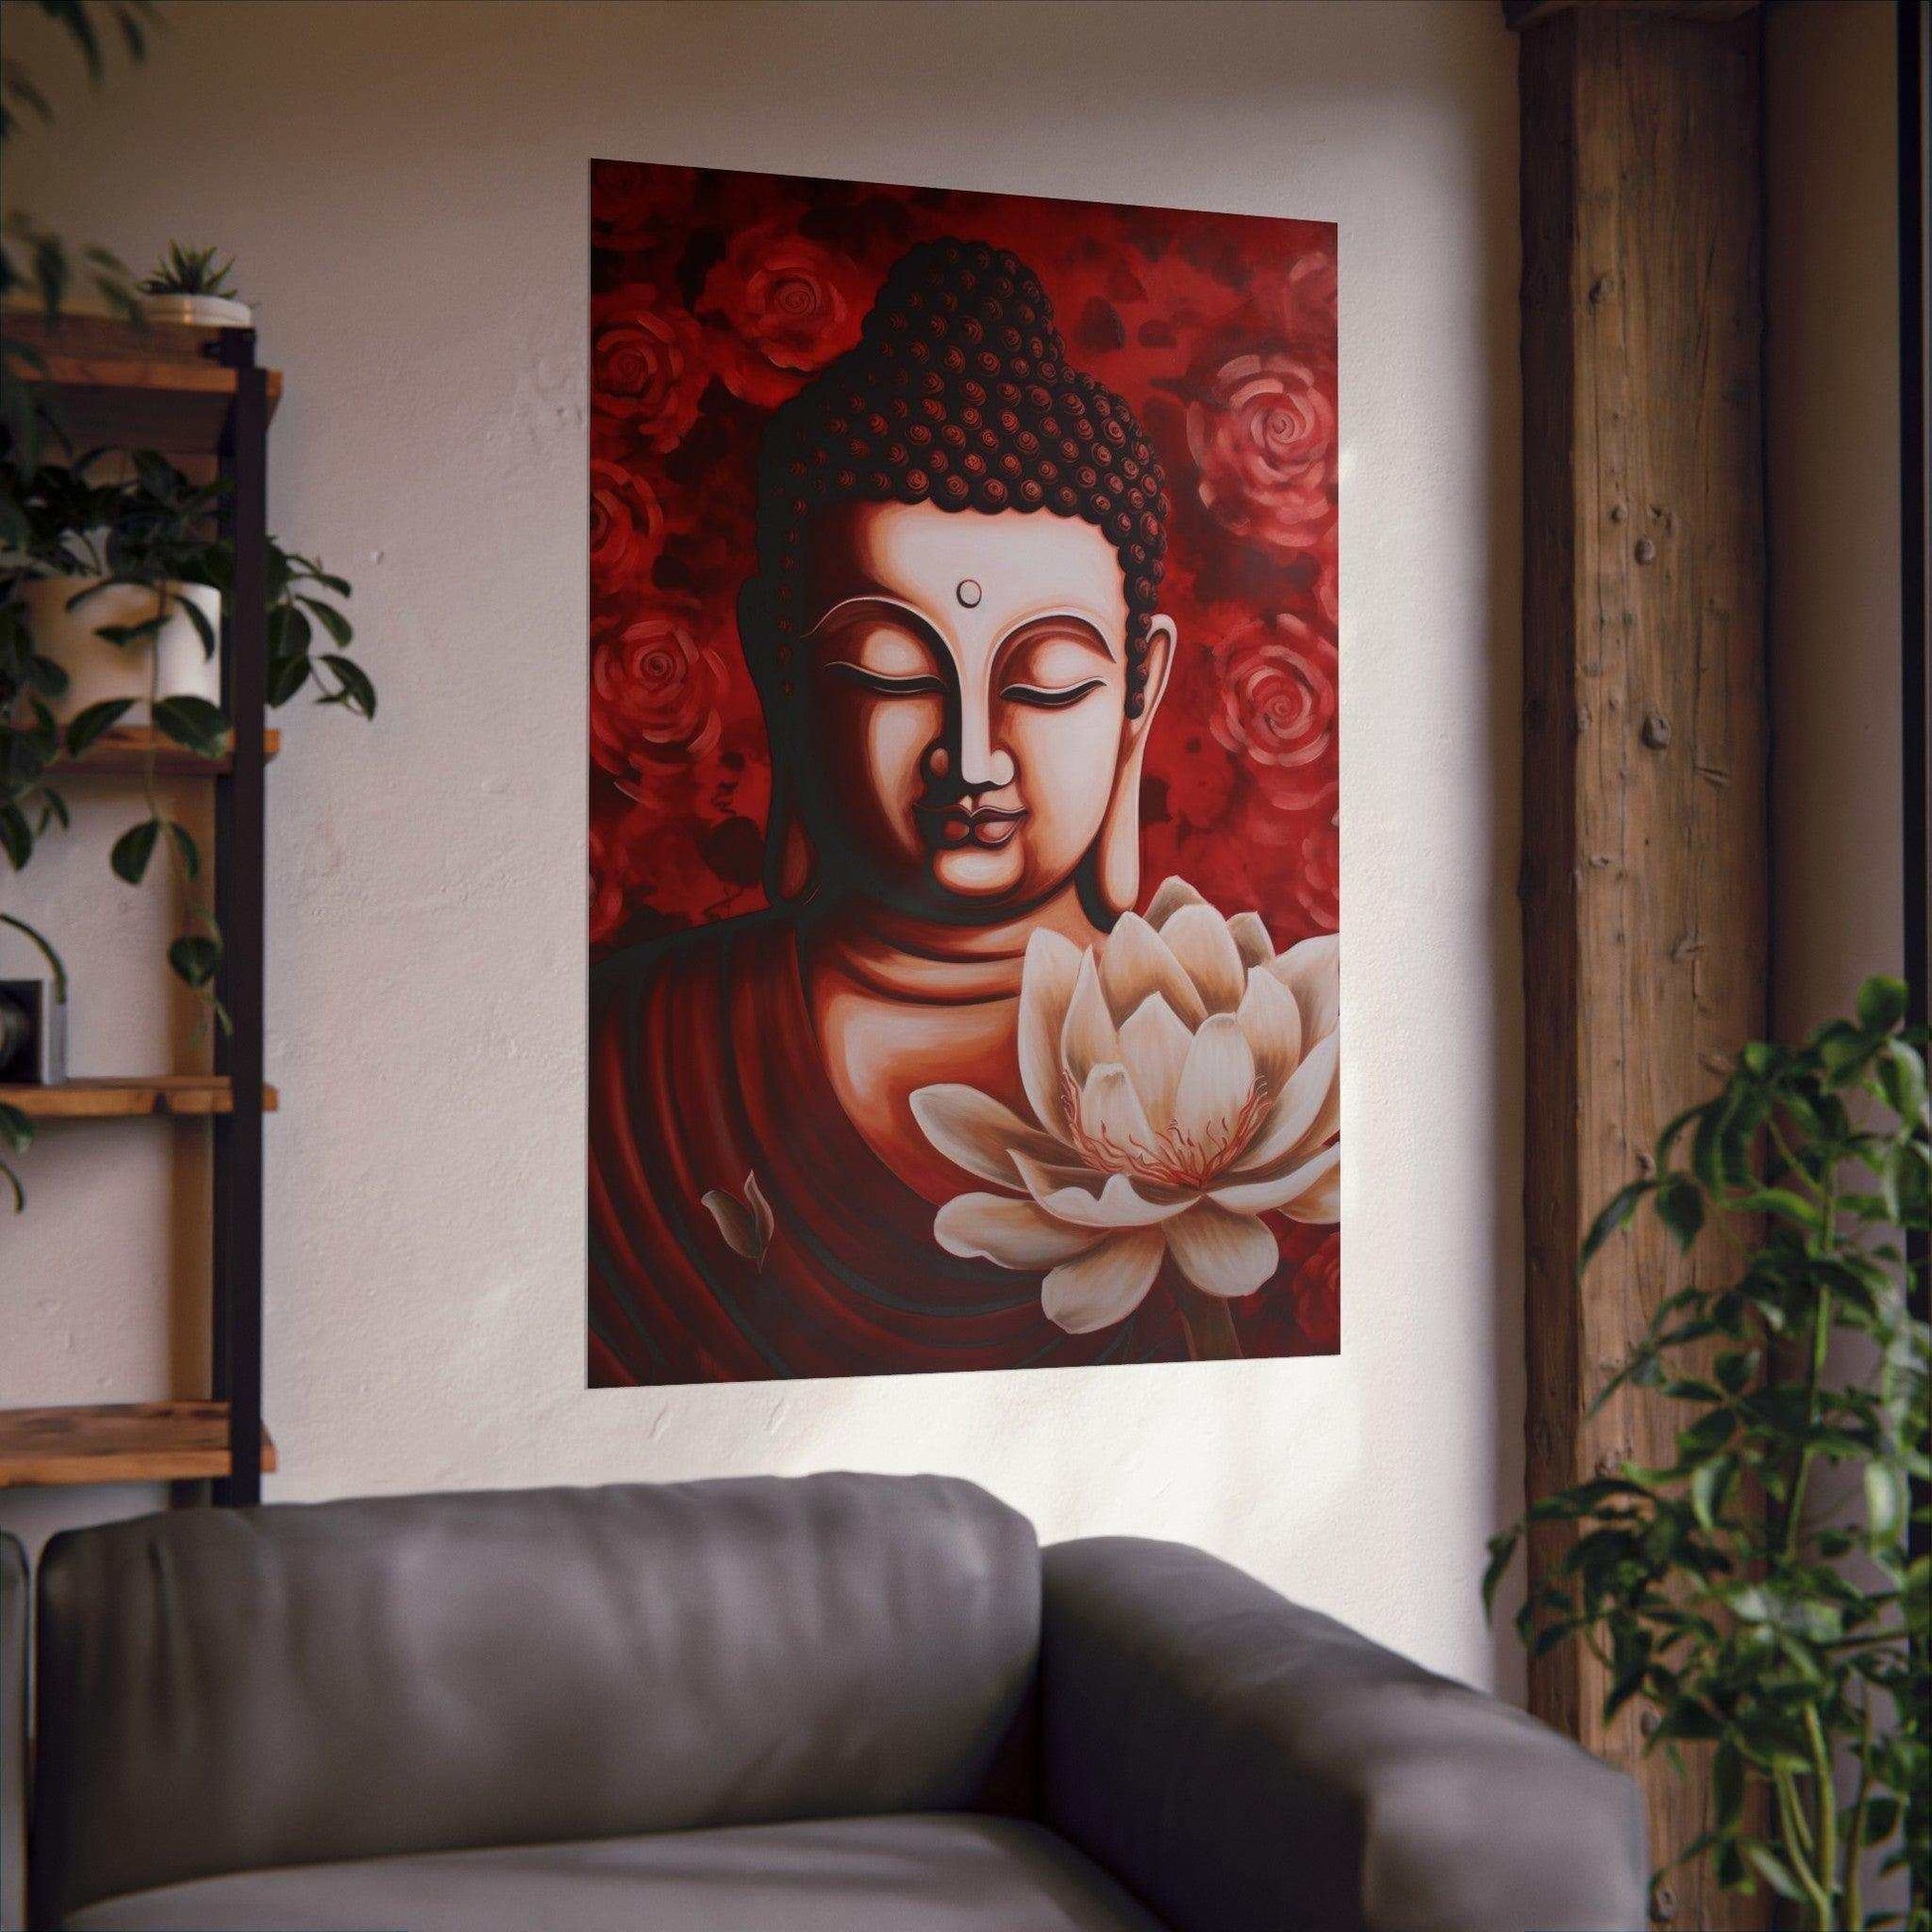 Serenity Blossom - Buddha Poster for Wall with Lotus -ZenArtBliss